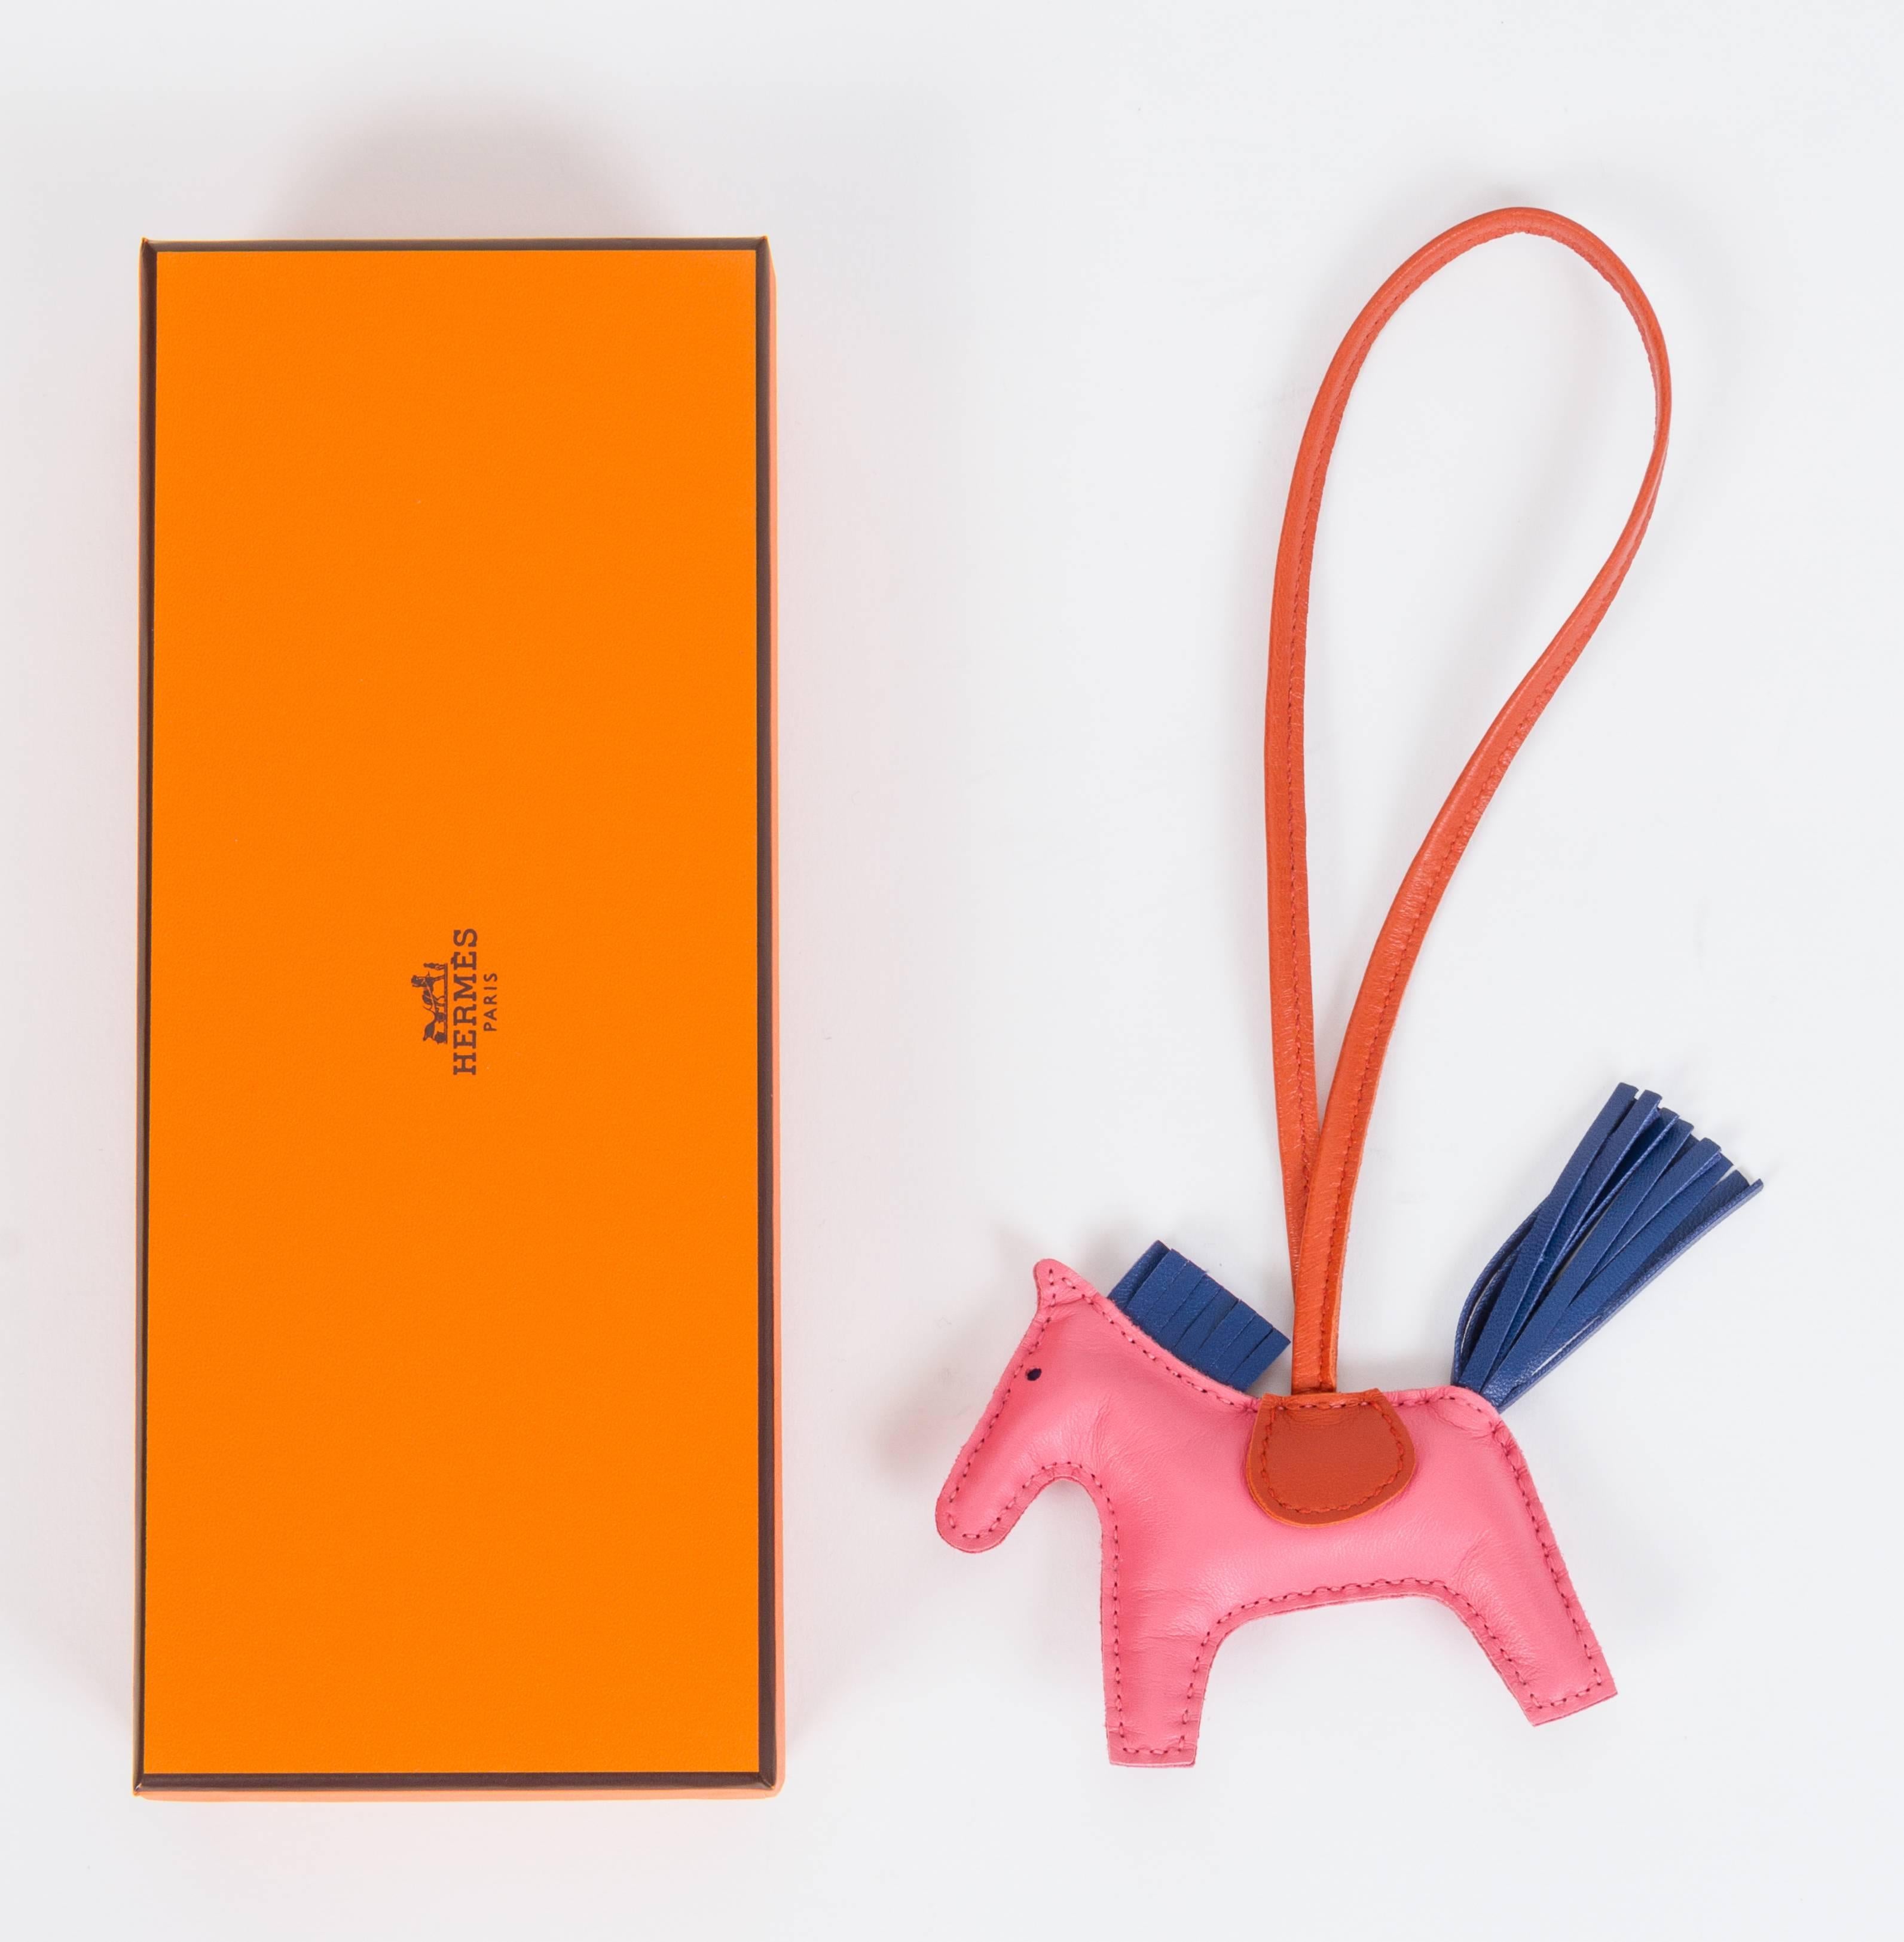 Hermes rare and collectible grigri rodeo bag charm PM (small). Combination of rose azalea, cornelian and blue de malte. Brand new in box with ribbon and gift bag.